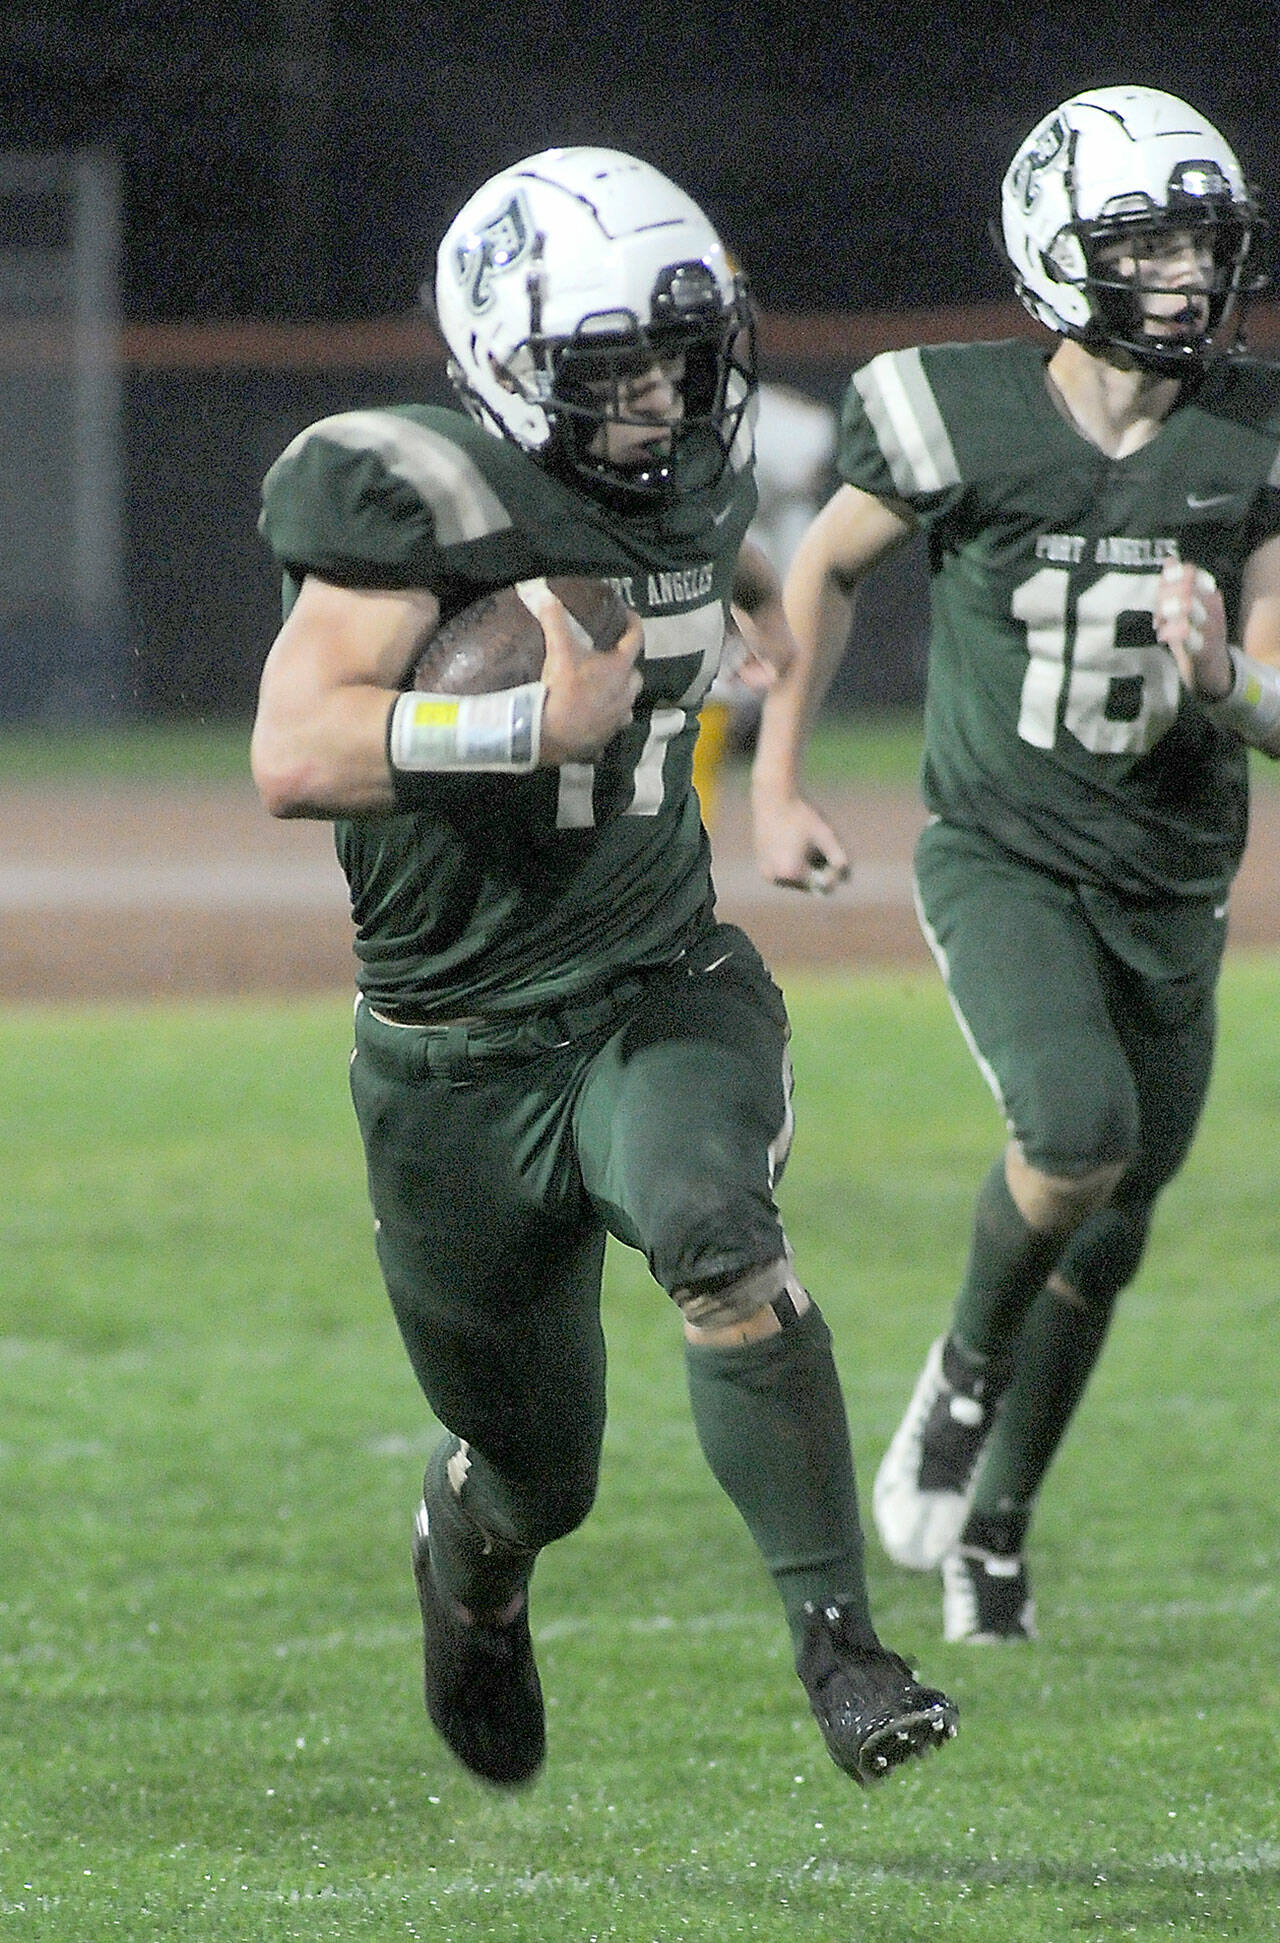 Port Angeles’ Jason Hawes, left, takes a punt return from deep in Roughrider territory for a second quarter touchdown against Kingston as teammate Blake Sohlberg follows behind on Friday at Port Angeles Civic Field. (KEITH THORPE/PENINSULA DAILY NEWS)